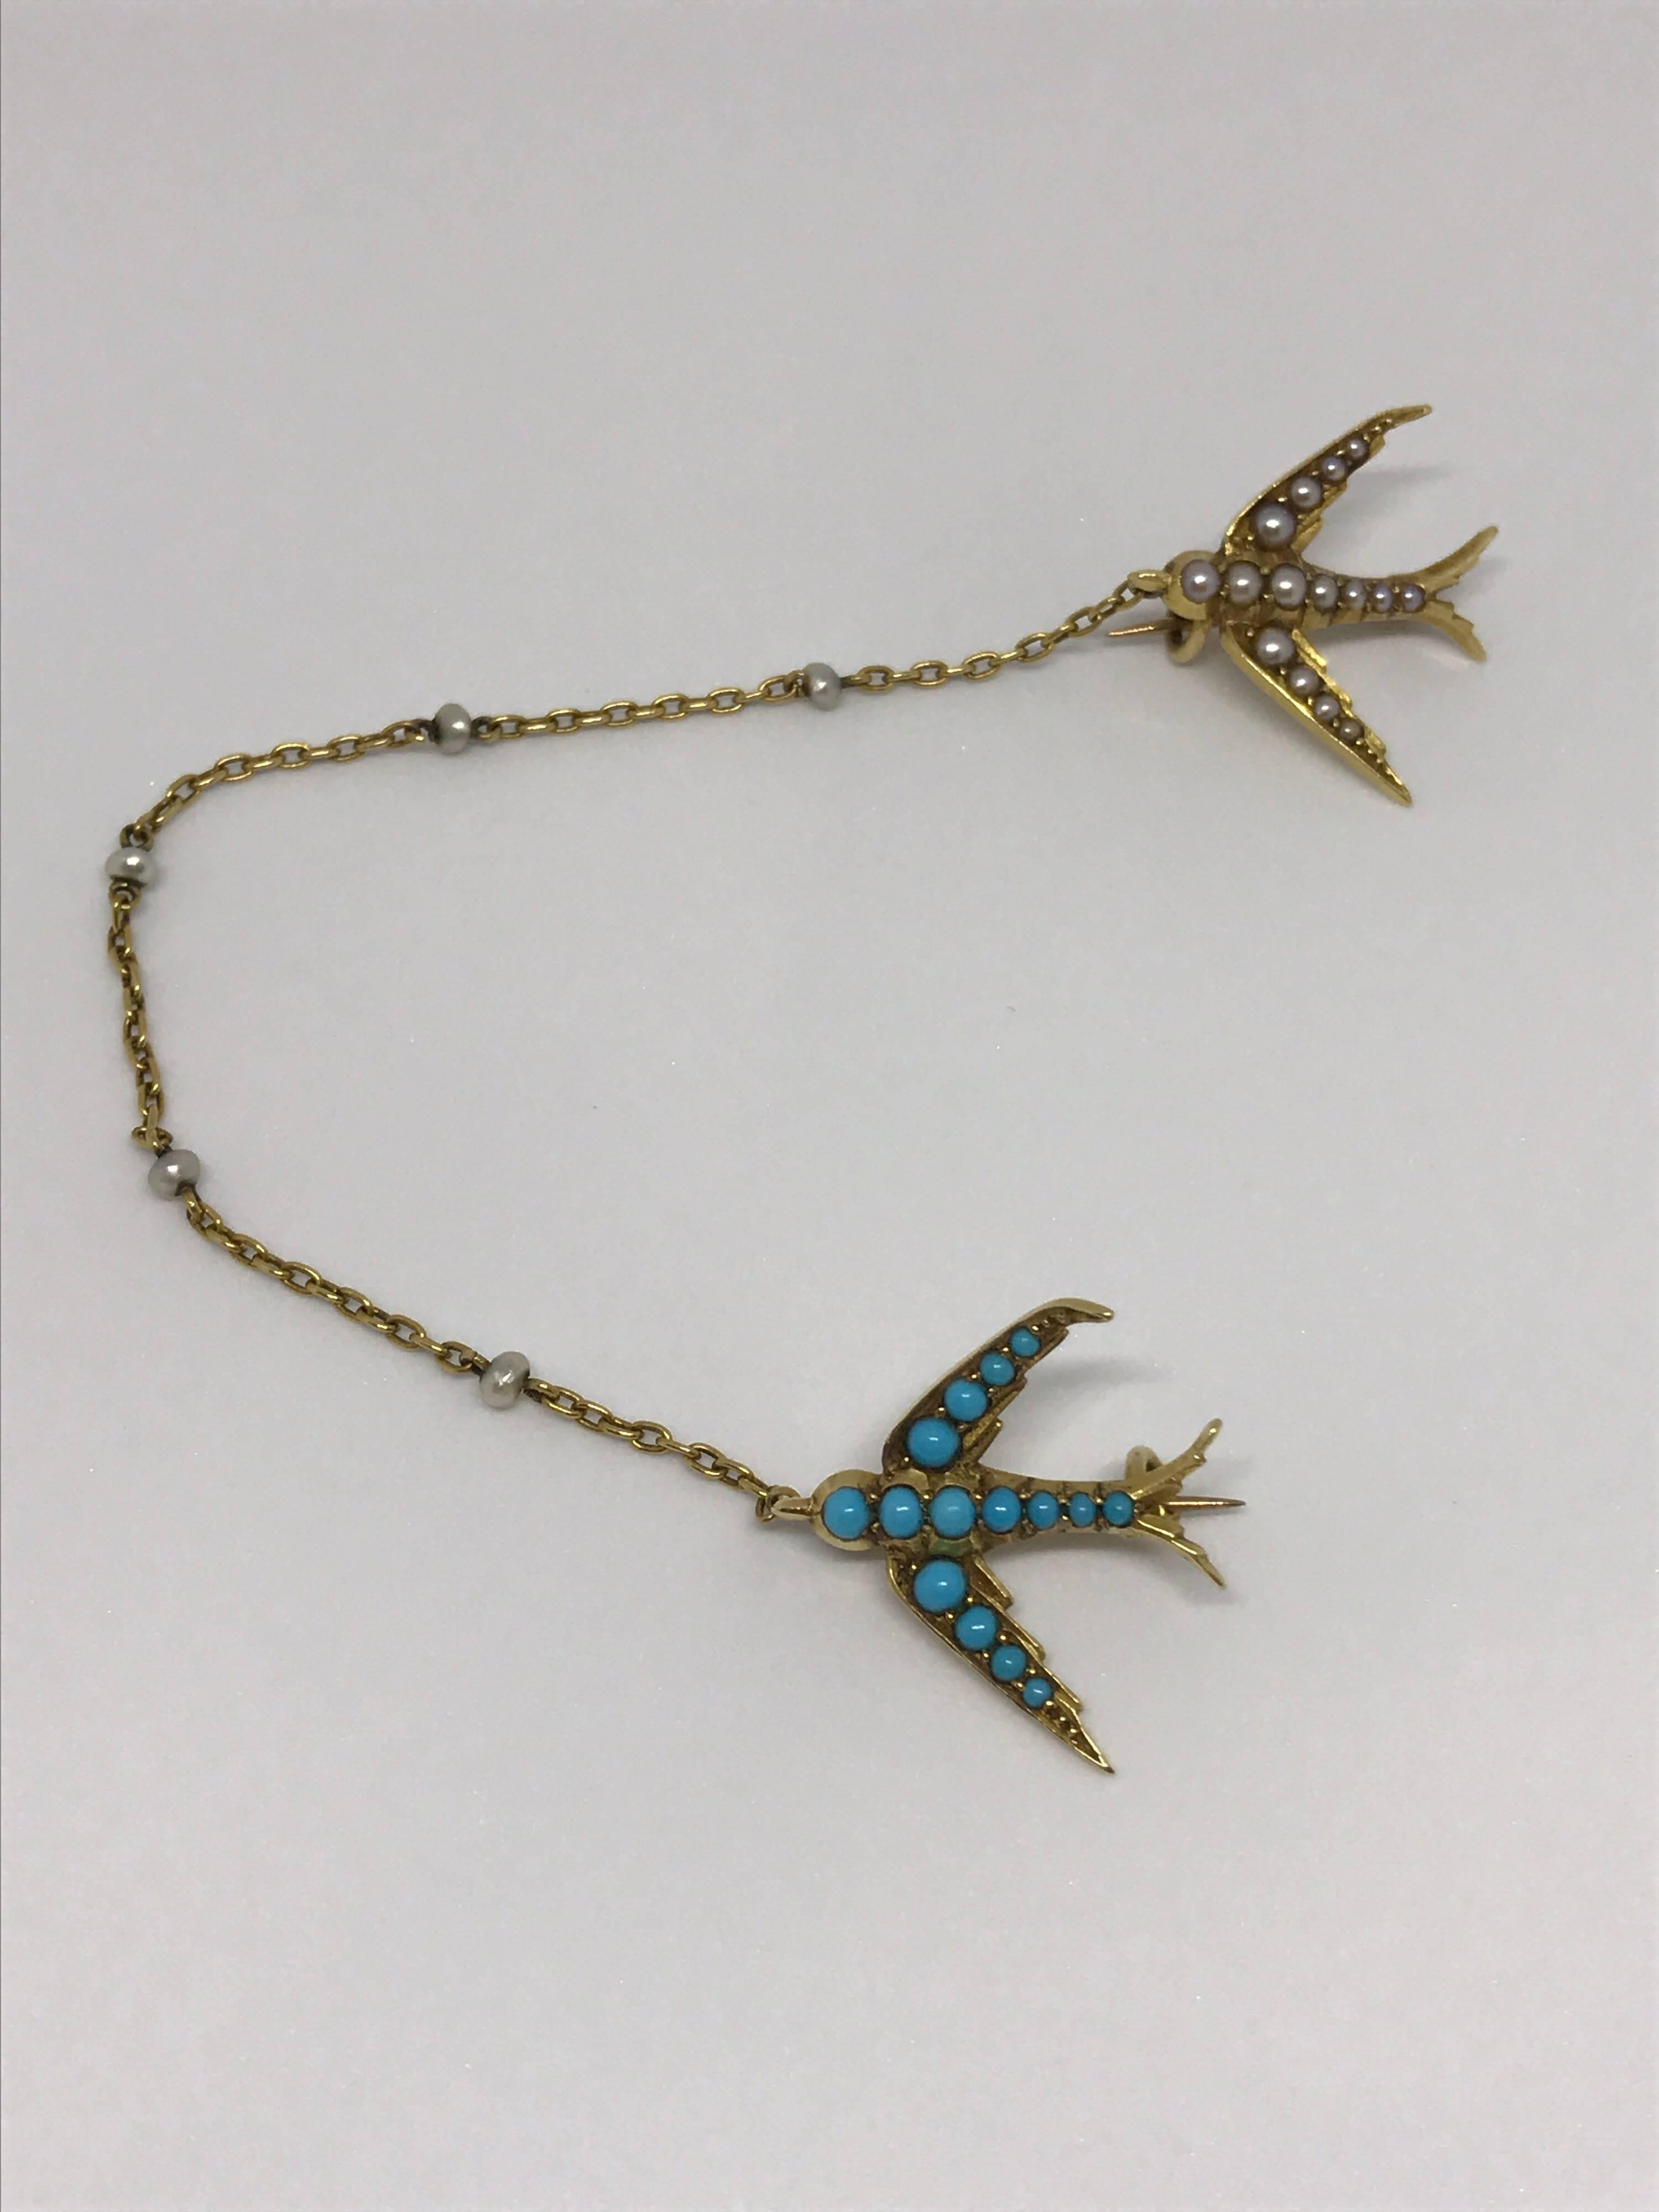 A pair of late Victorian split pearl and cabochon turquoise swallow brooch, designed as two swallows in flight, one encrusted with turquoise cabochon and the other split pearls, both set in 15ct yellow gold with a seed pearl trace chain connected to